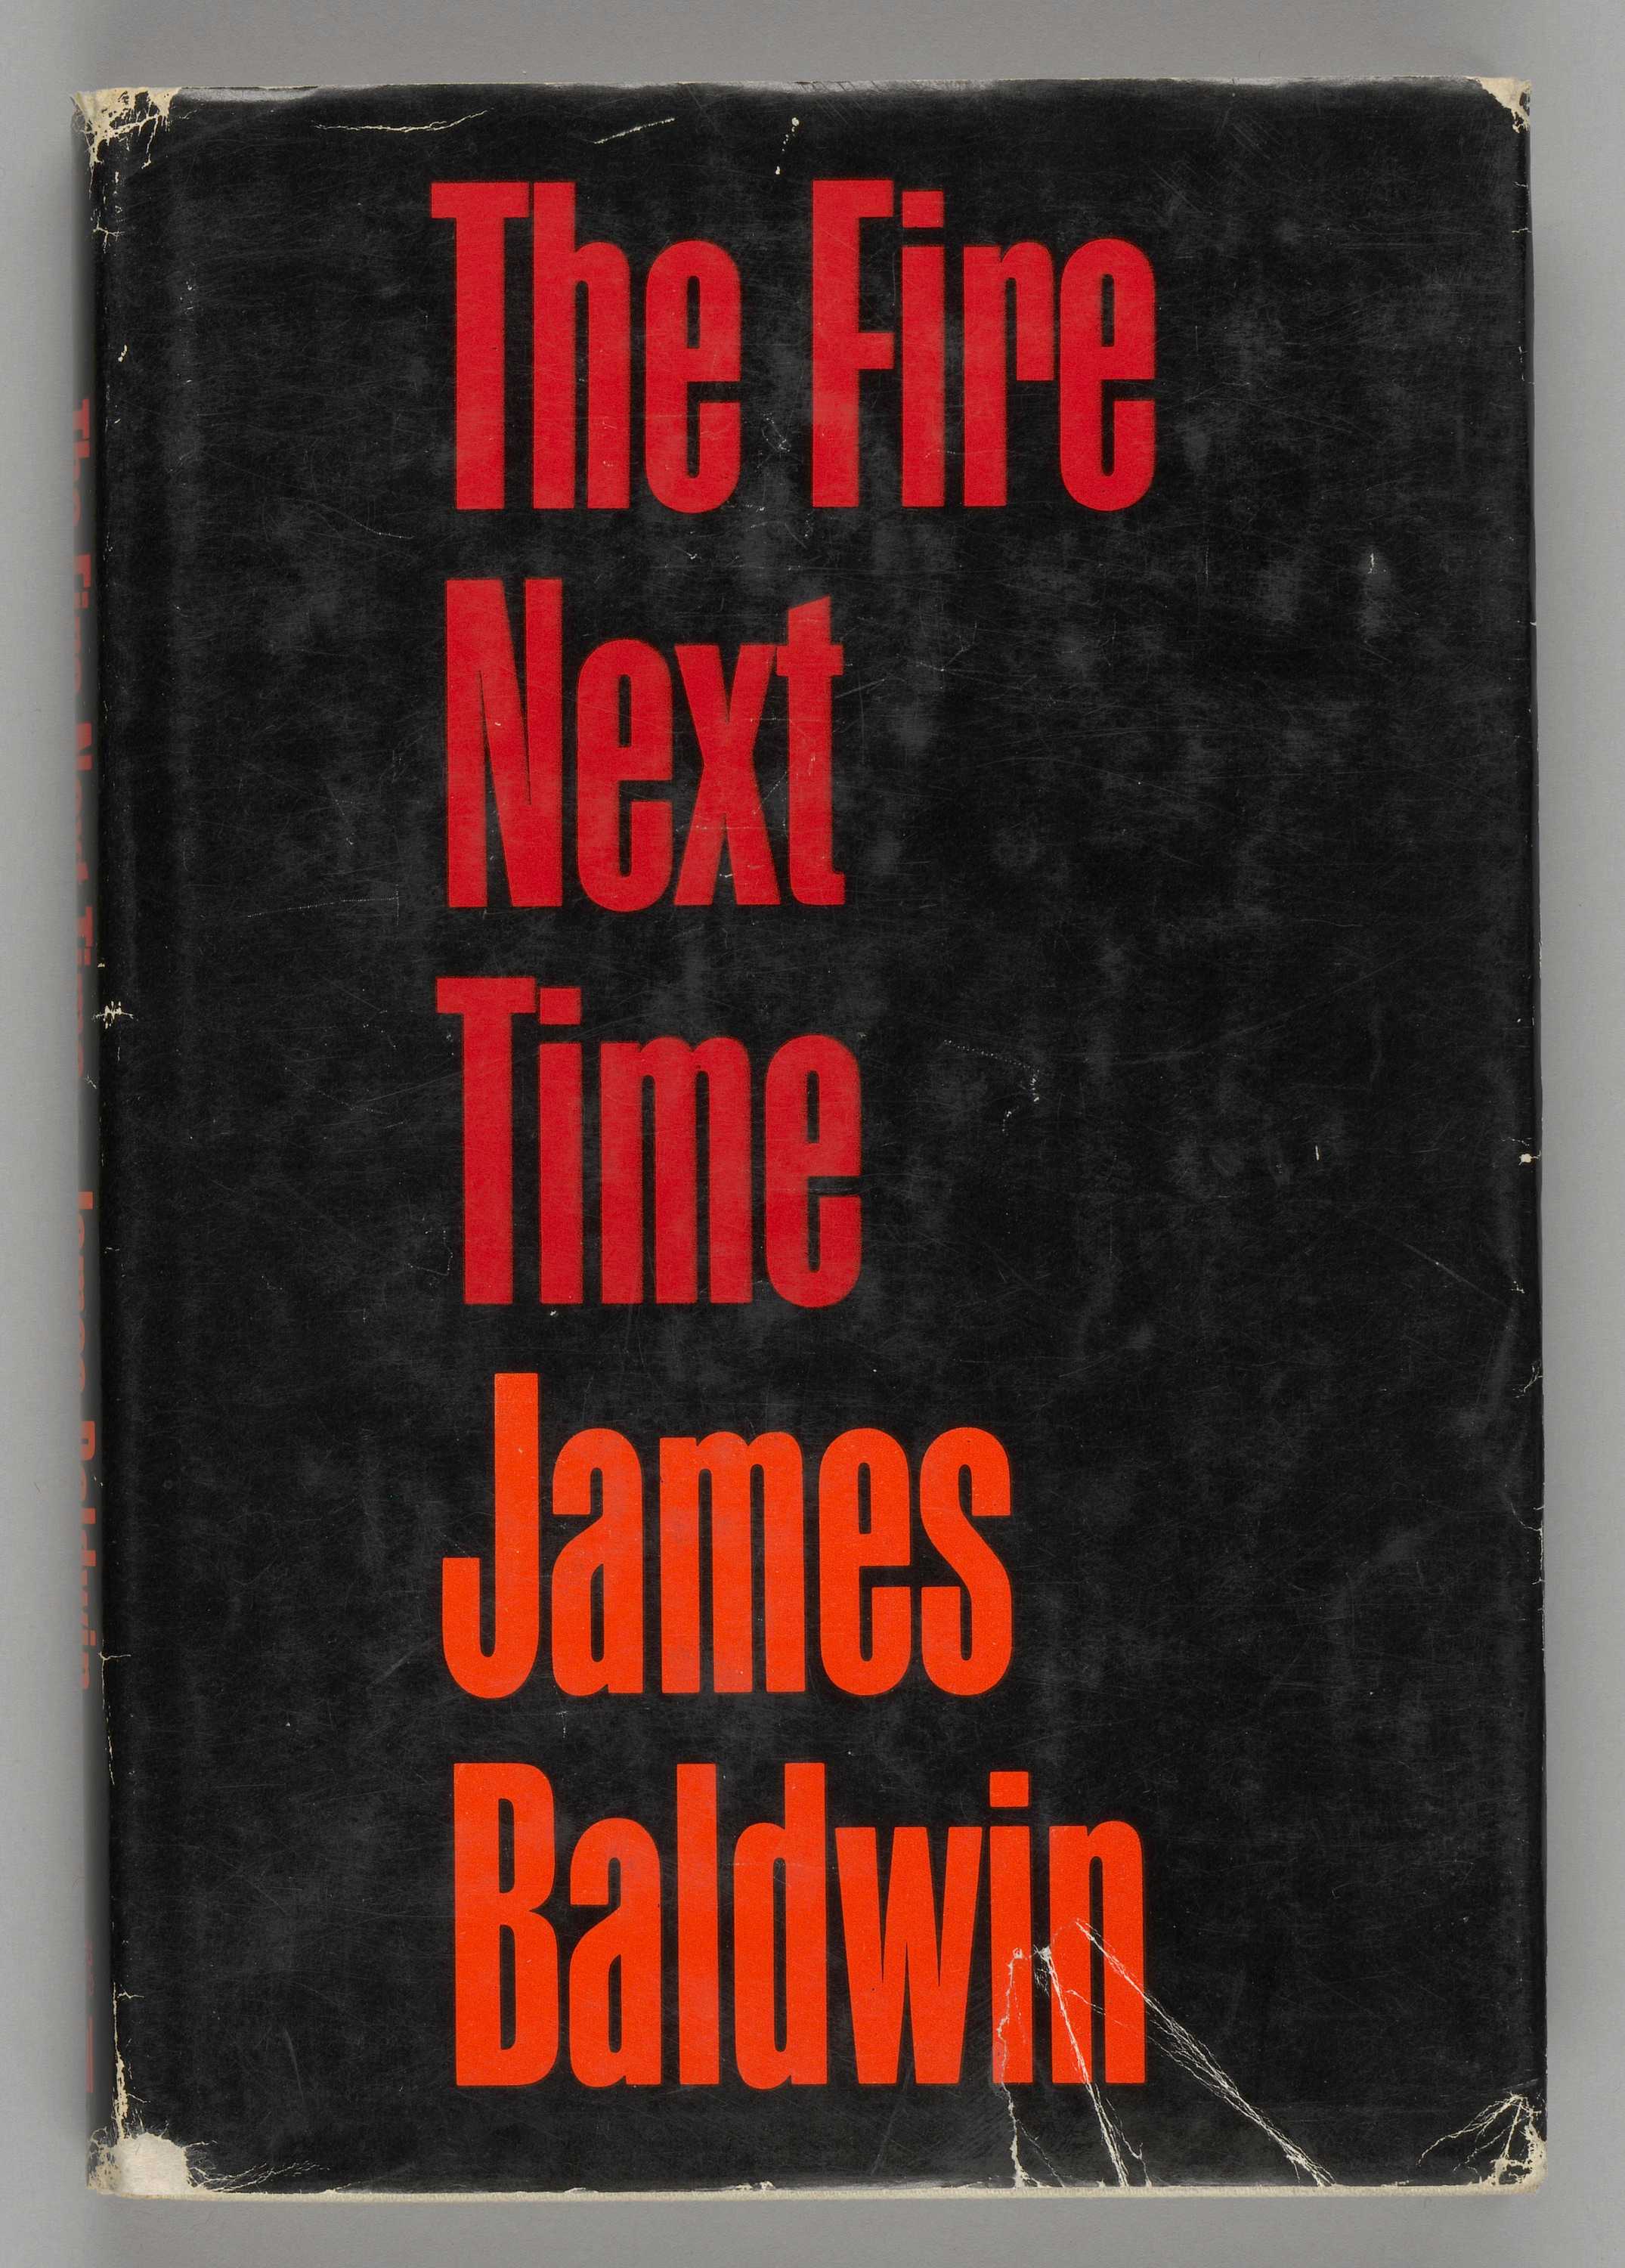 A hardback copy of The Fire Next Time by James Baldwin. The book has a paper cover with clear plastic cover over top of the book. The paper cover is black with red and orange type. The front of the paper cover reads: [The Fire / Next / Time] in red and [James / Baldwin] in orange, centered but aligned to the left. The back of the paper cover is entirely taken up by a black-and-white picture of James Baldwin. The picture is a close-up of Baldwin, who has his hands crossed in front of him and is wearing a jacket. The hardback book itself is white with red type. The interior pages, one hundred and twenty-three in total, front and back included, are off-white paper with black type, and no images. One of the interior pages has a stamp that reads: [John R. McElderry].